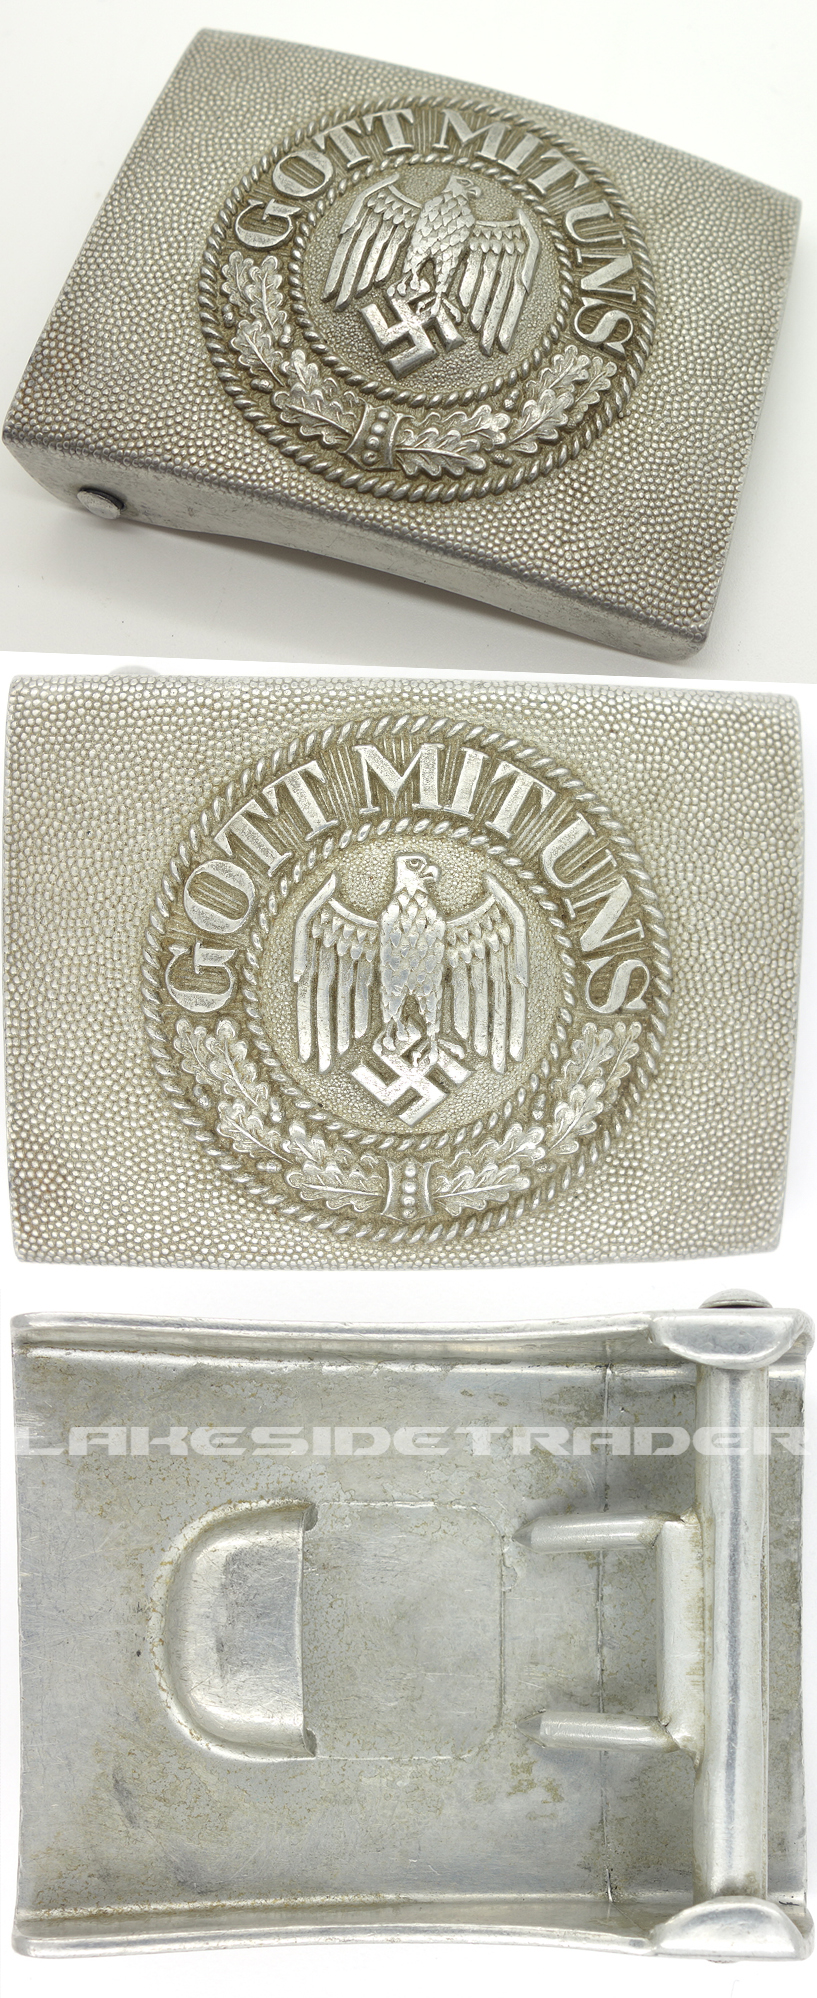 Early Aluminium Army Belt Buckle by Schroder